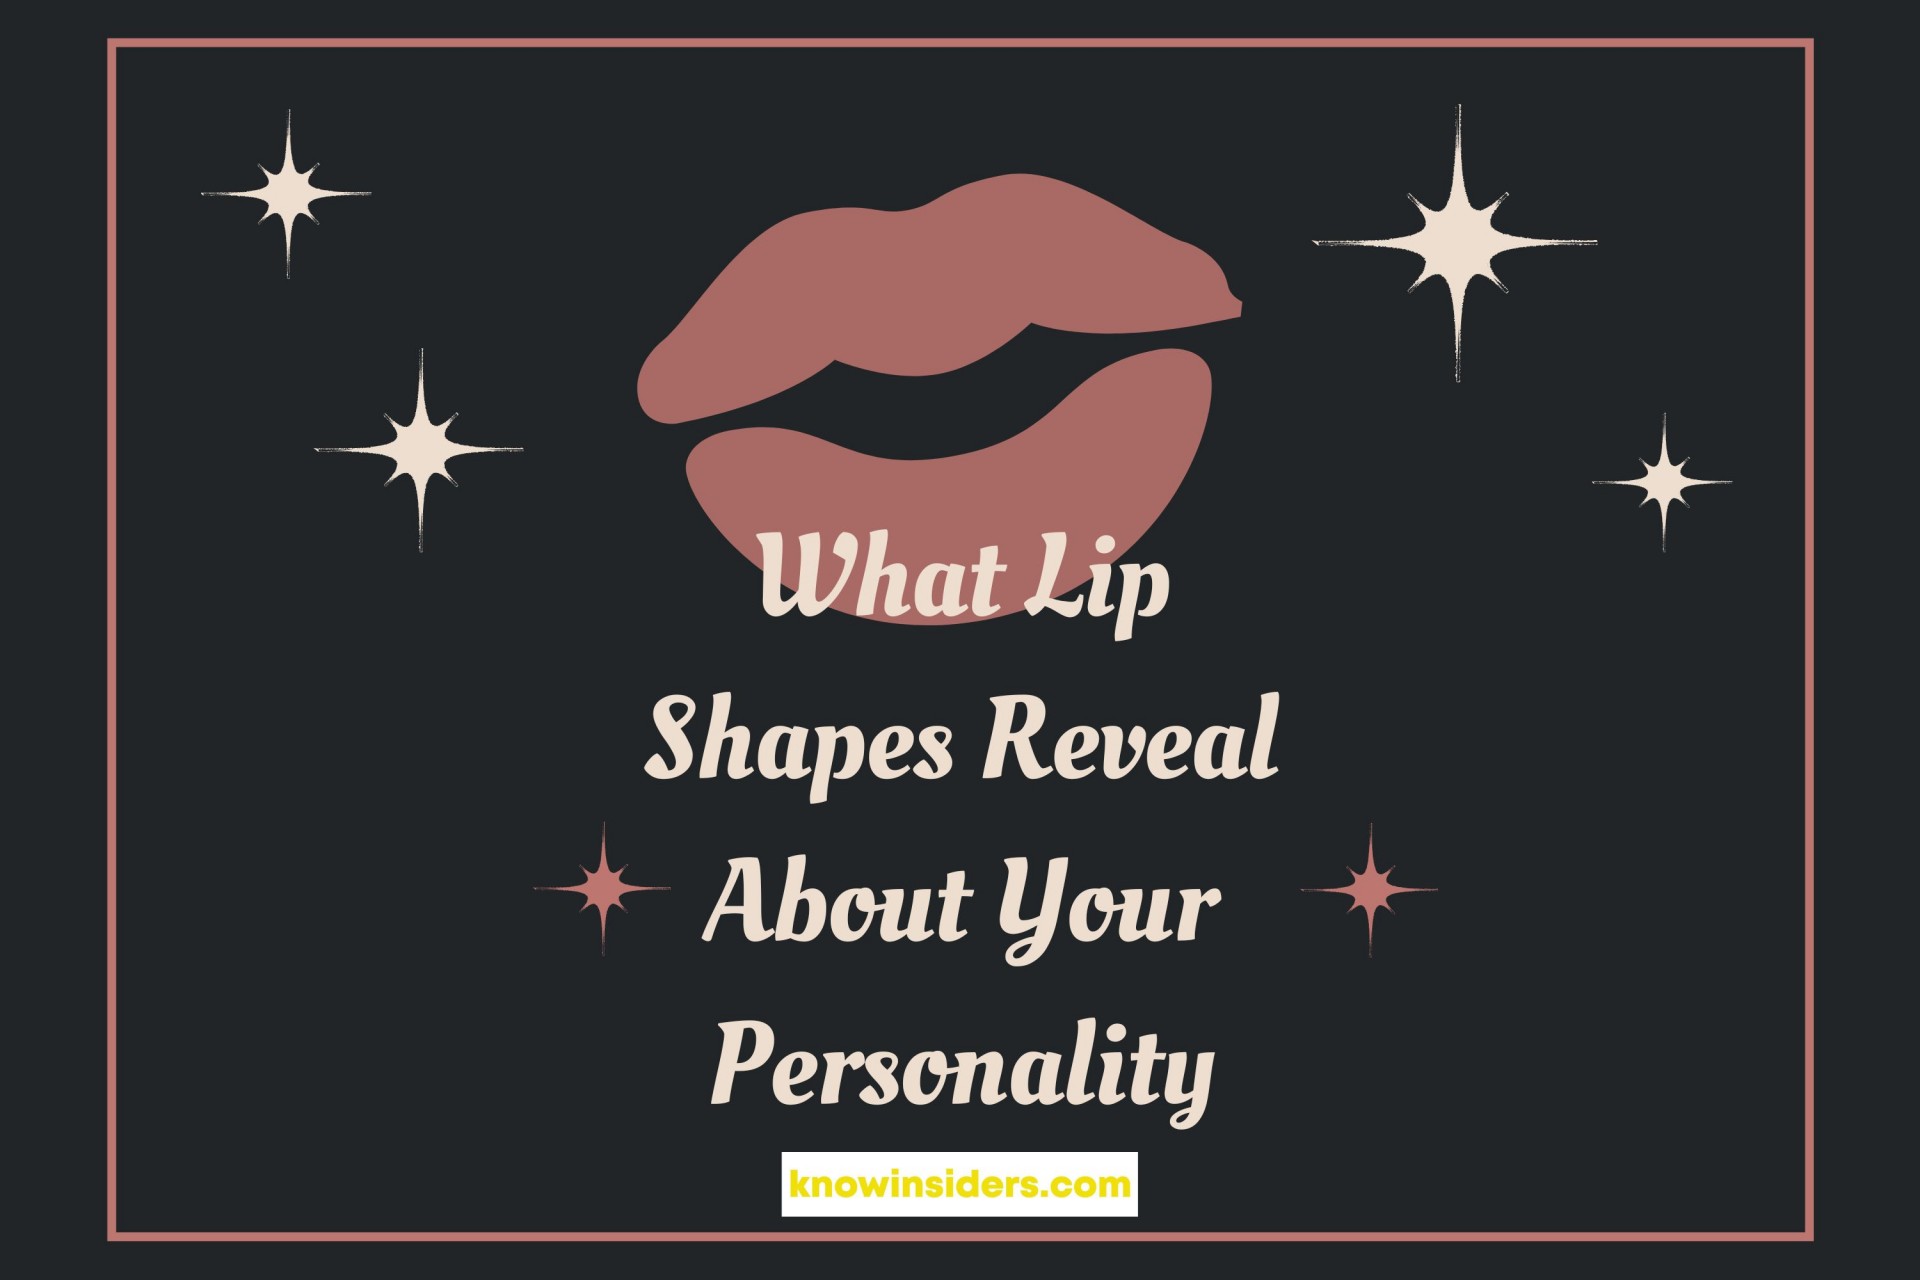 Lip Shapes Reveal Your Personality & Destiny, According to Anthropology